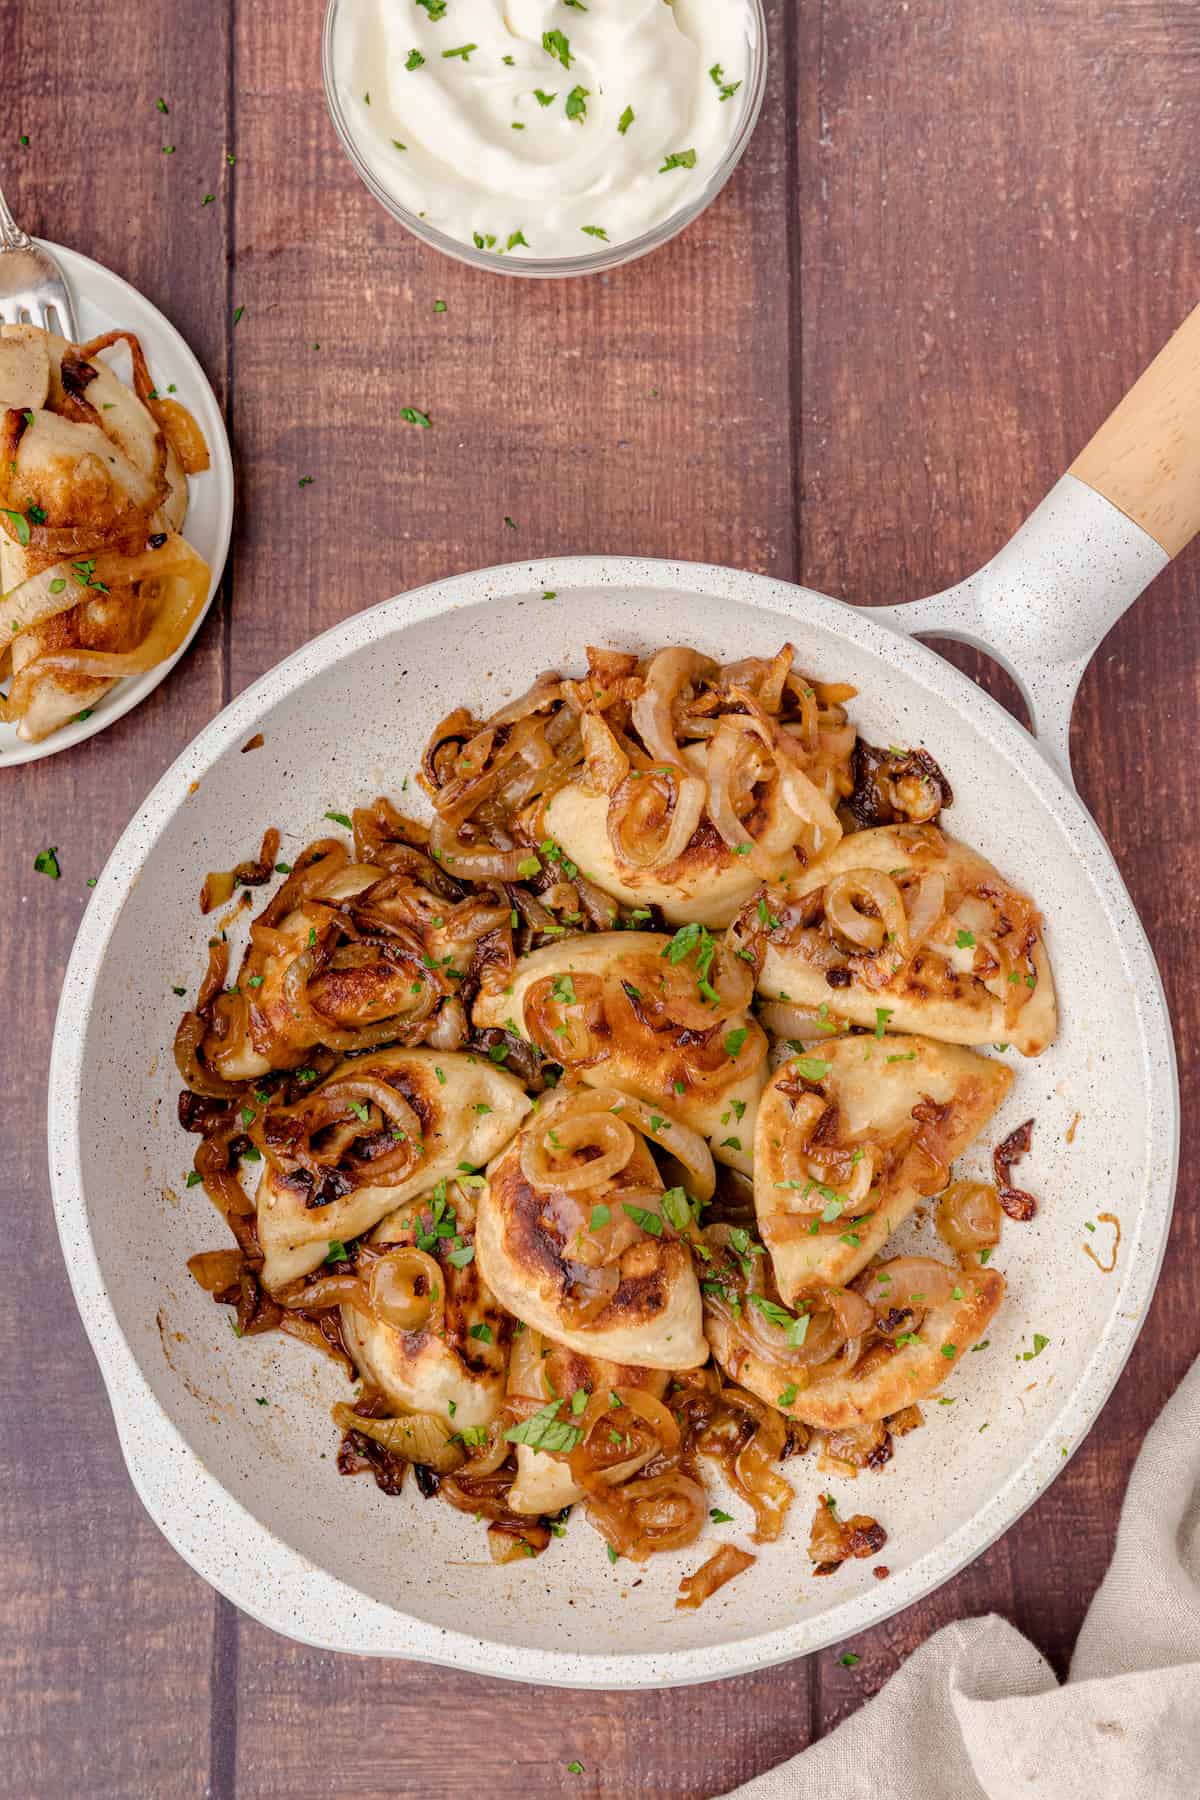 add the pierogies to the onions in the skillet